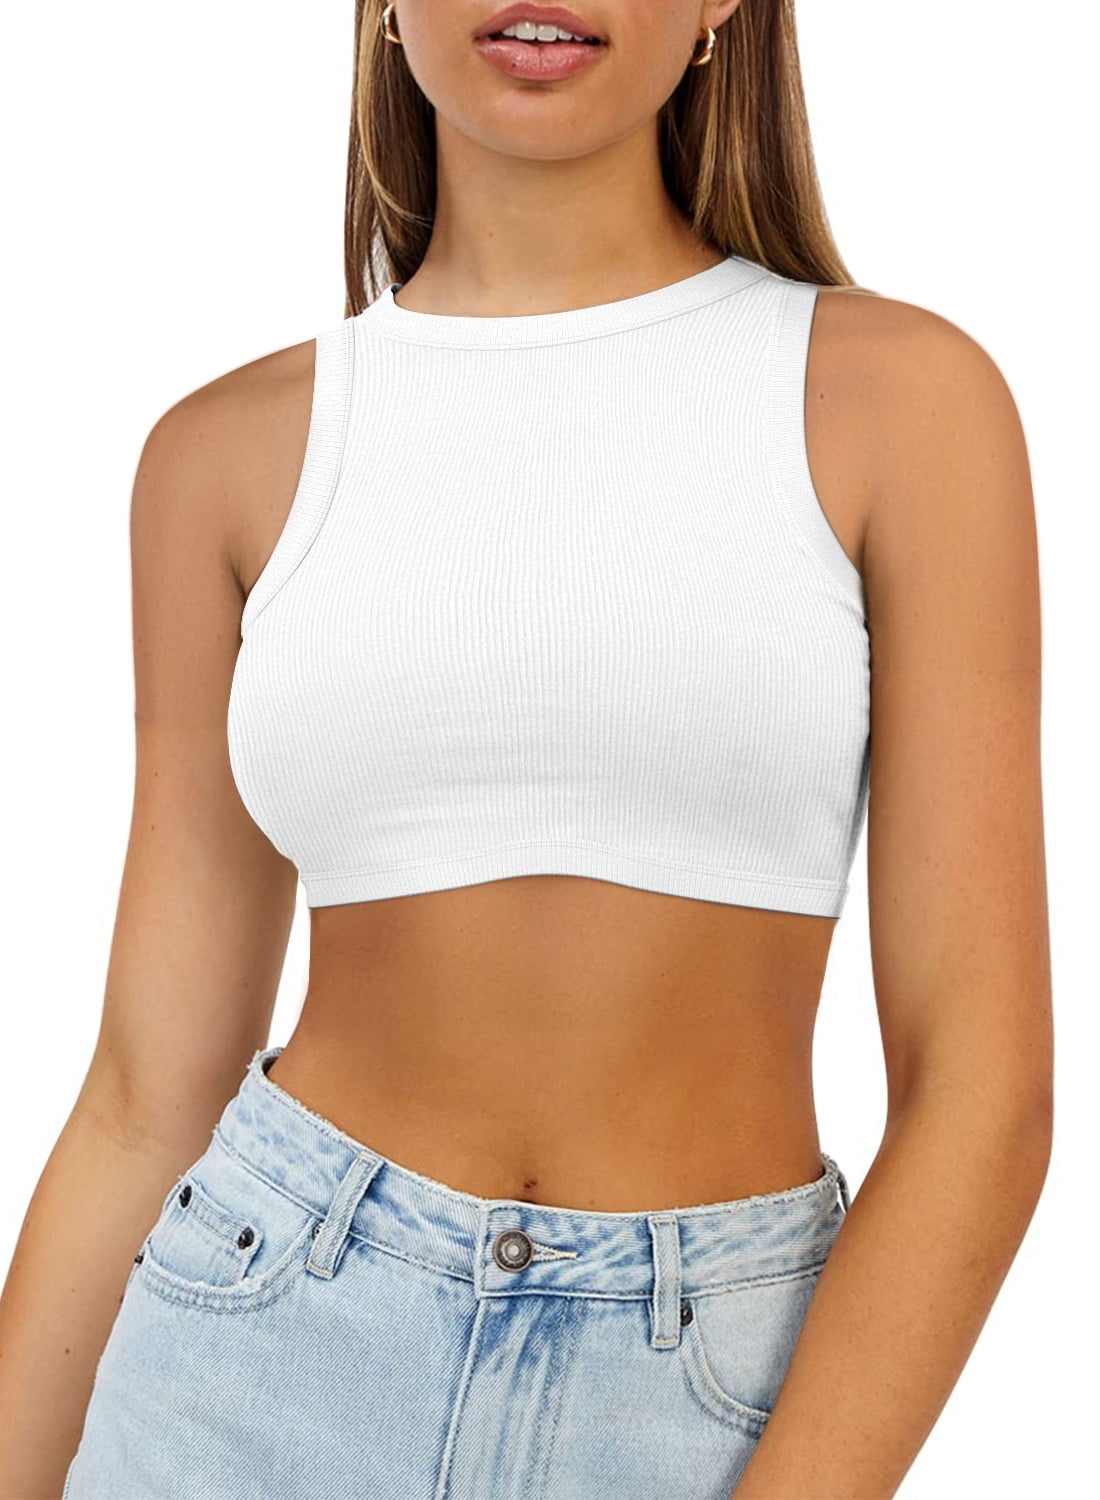 Vafful Vafful Crop Tank Top for Women - Fashionable Ribbed Sleeveless Shirt  - Perfect for Summer - Ideal for Workout or Everyday Wear - Available in  Different Colors and Sizes 